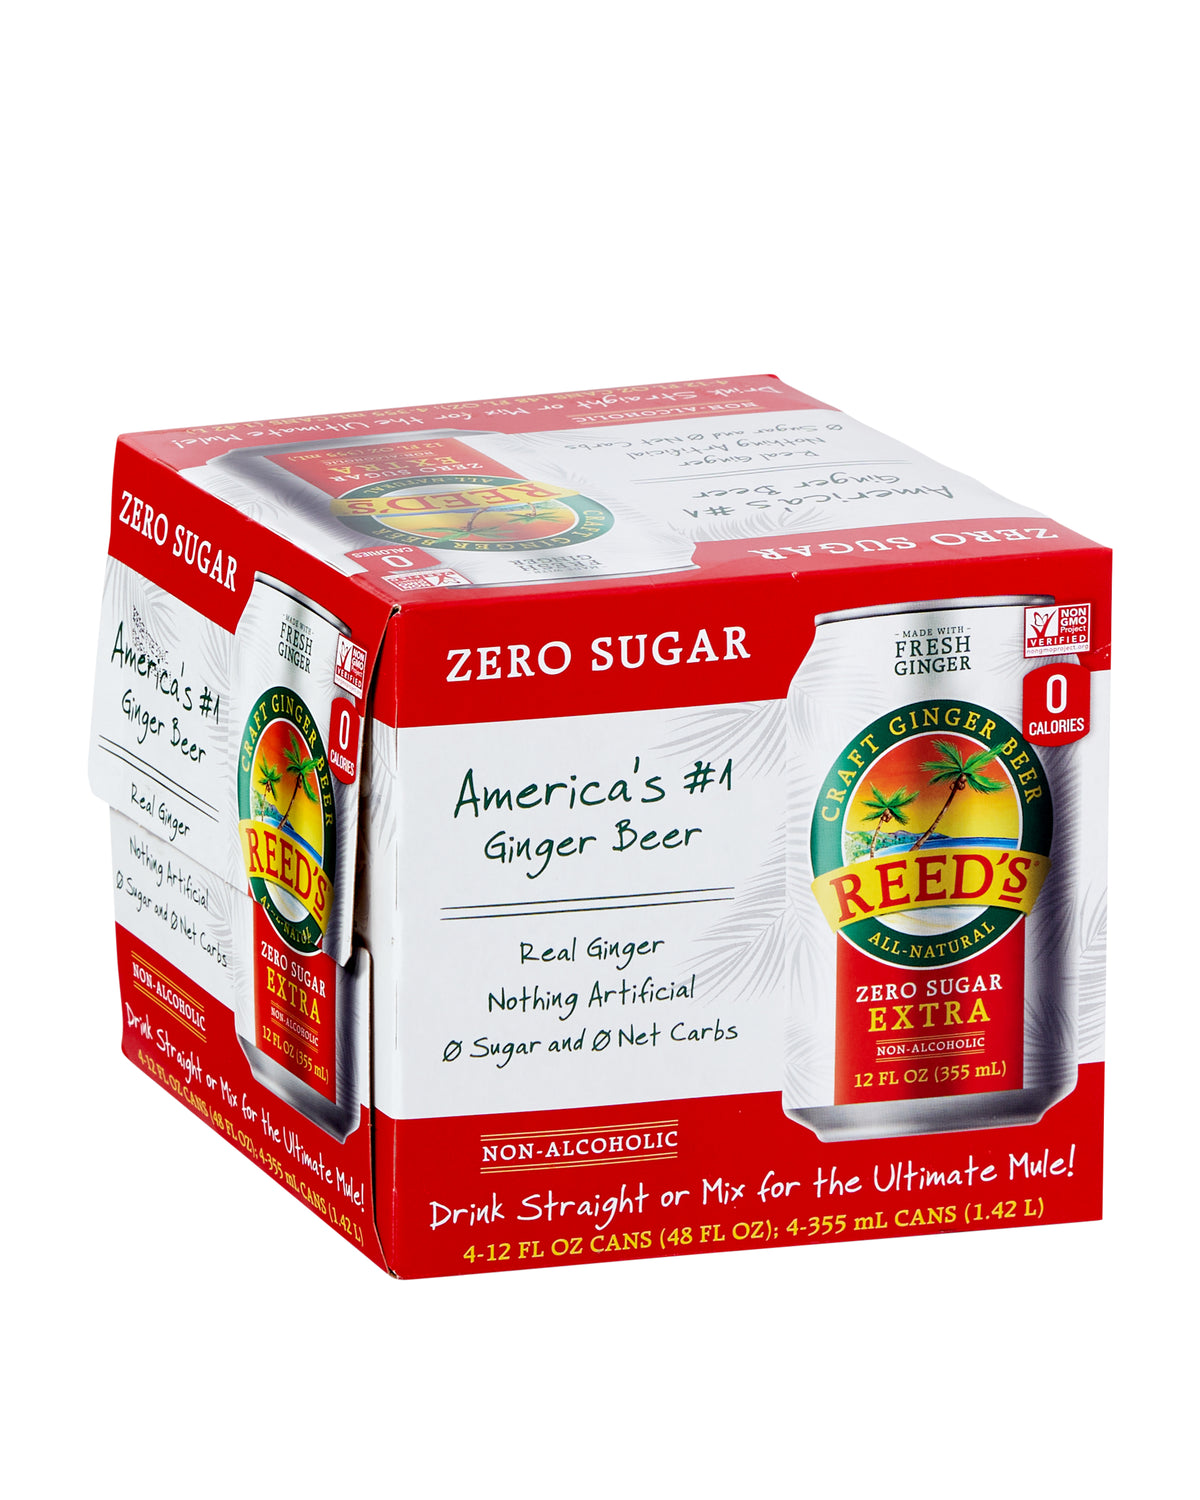 Reed's Zero Sugar Extra Ginger Beer 4 pack